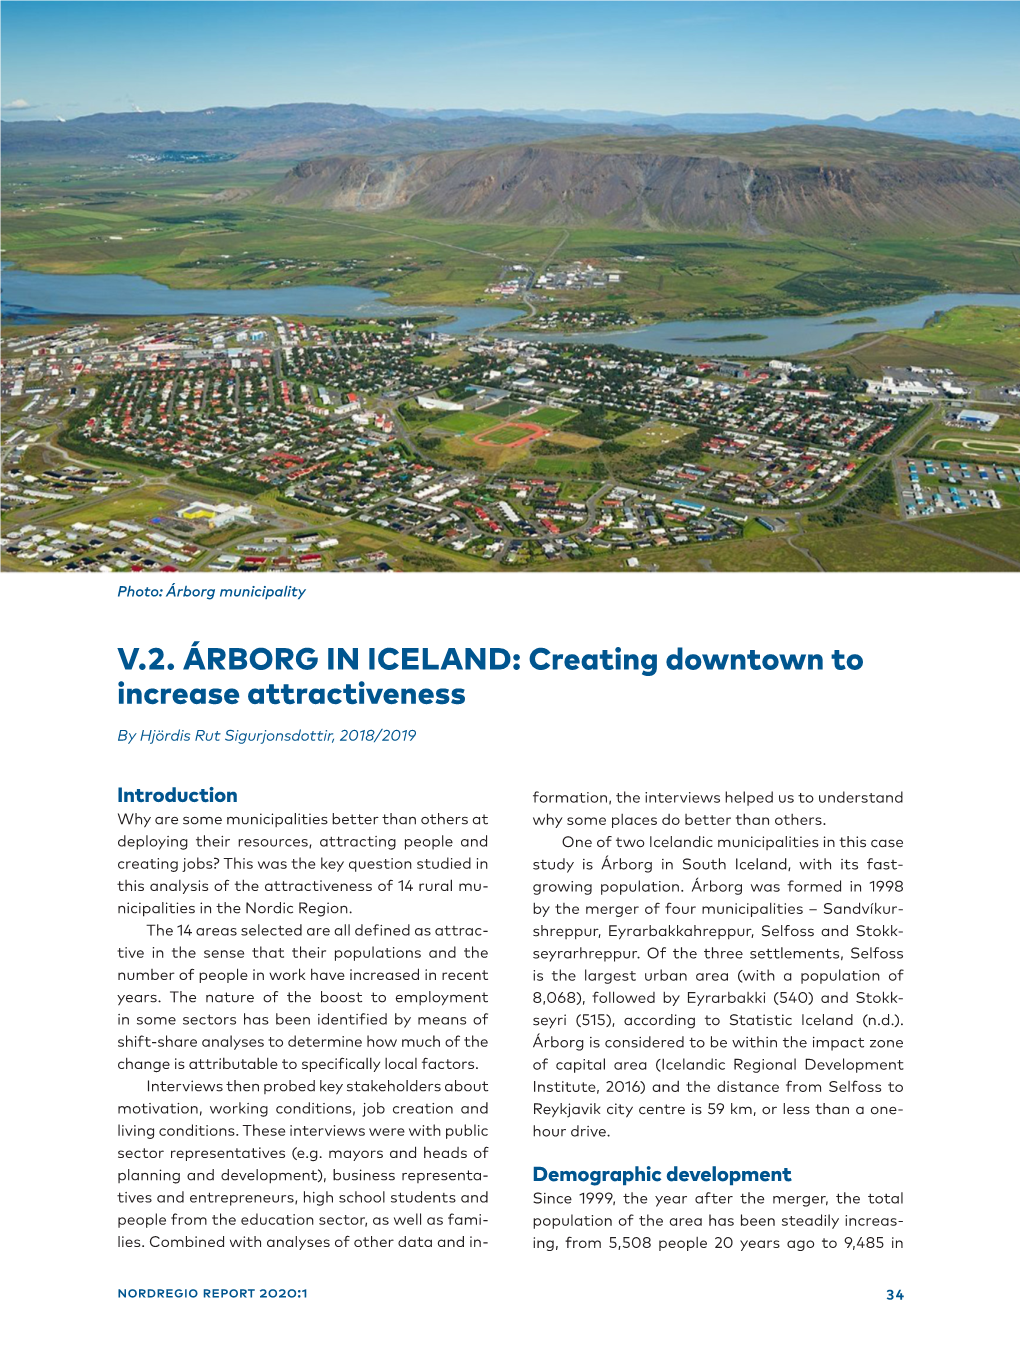 V.2. ÁRBORG in ICELAND: Creating Downtown to Increase Attractiveness